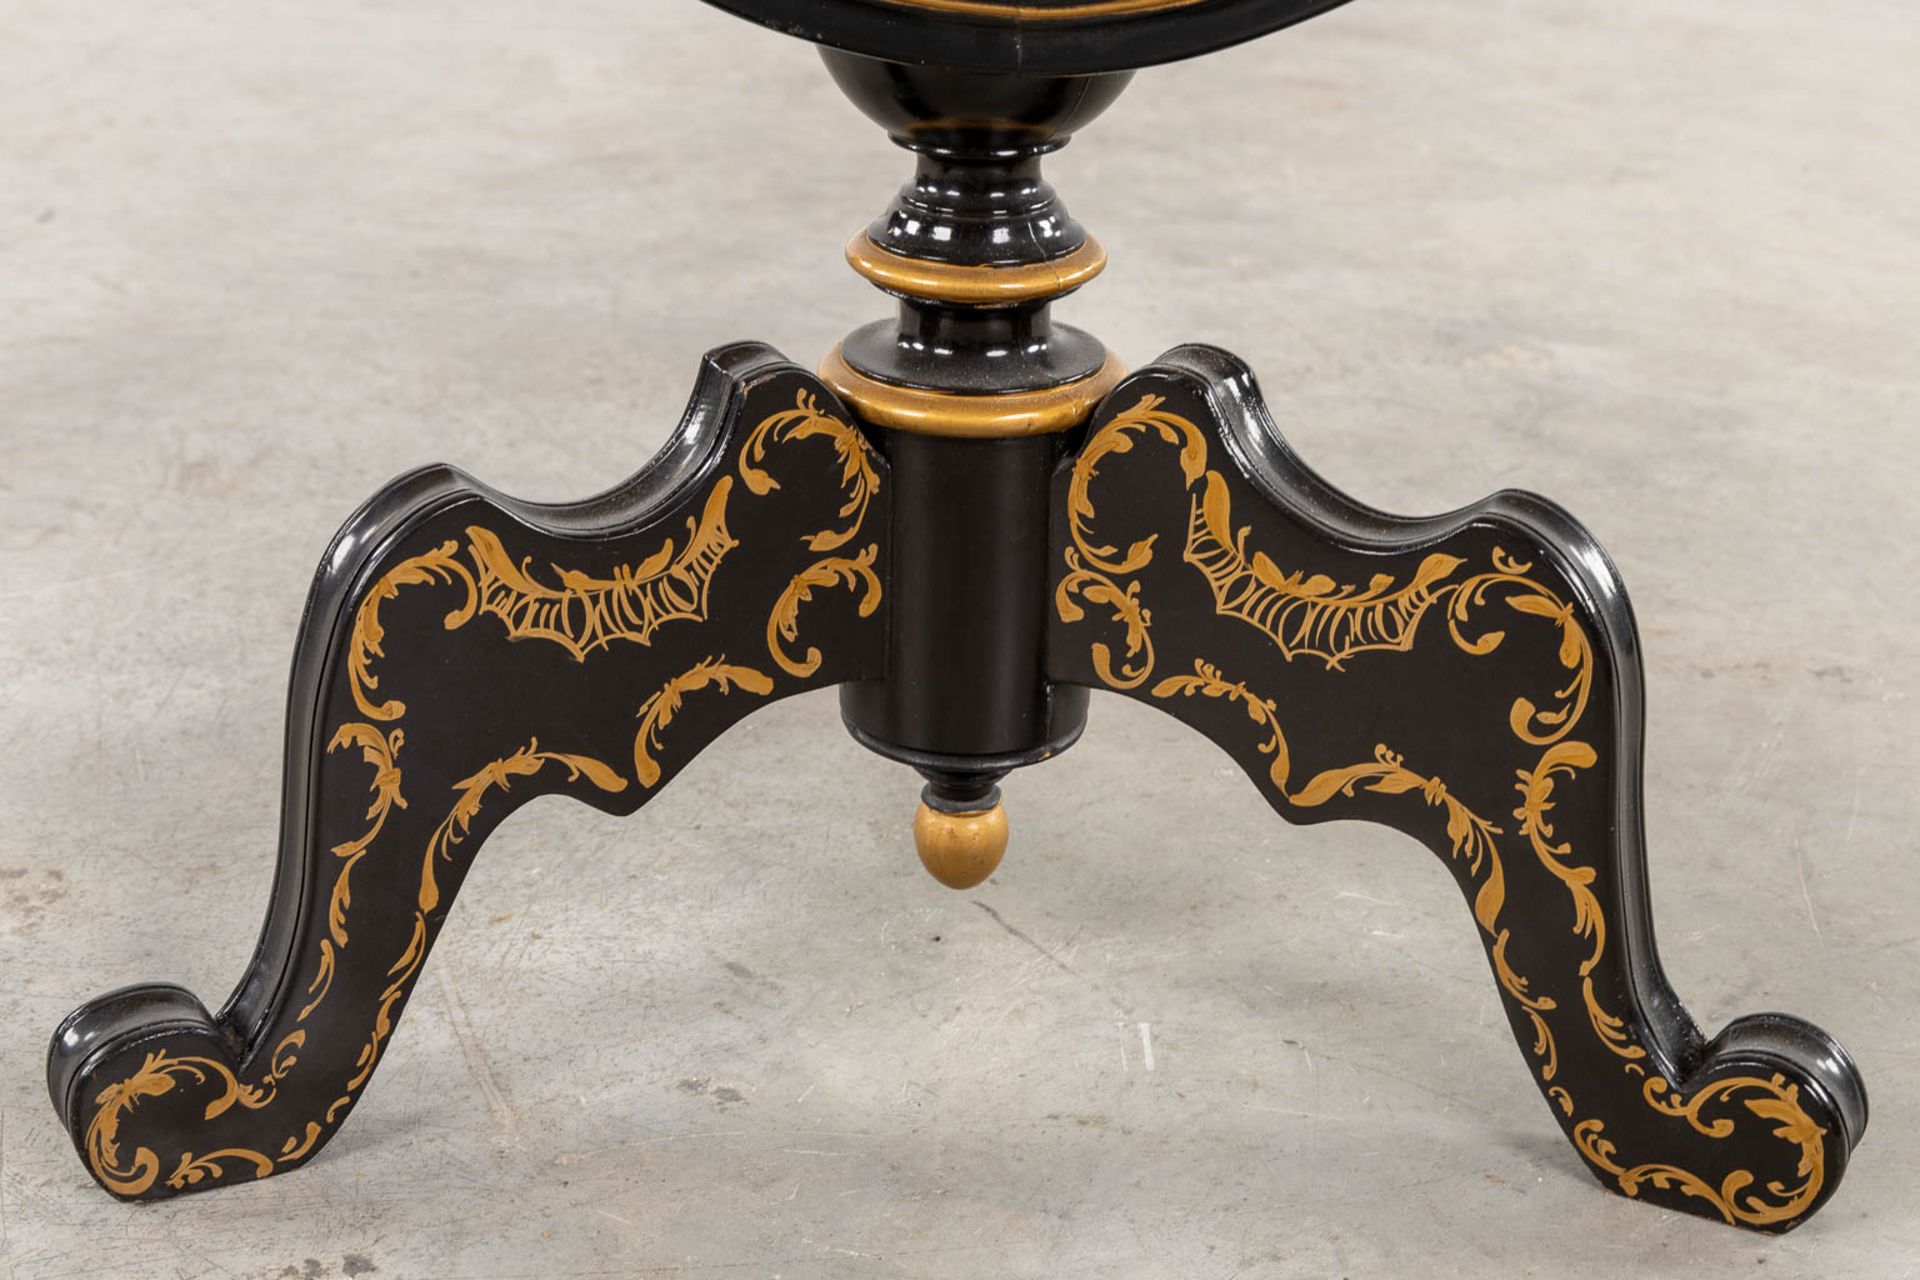 A Tilt-Top table with hand-painted floral decor, Napoleon 3 style. (H:67 x D:72 cm) - Image 8 of 9